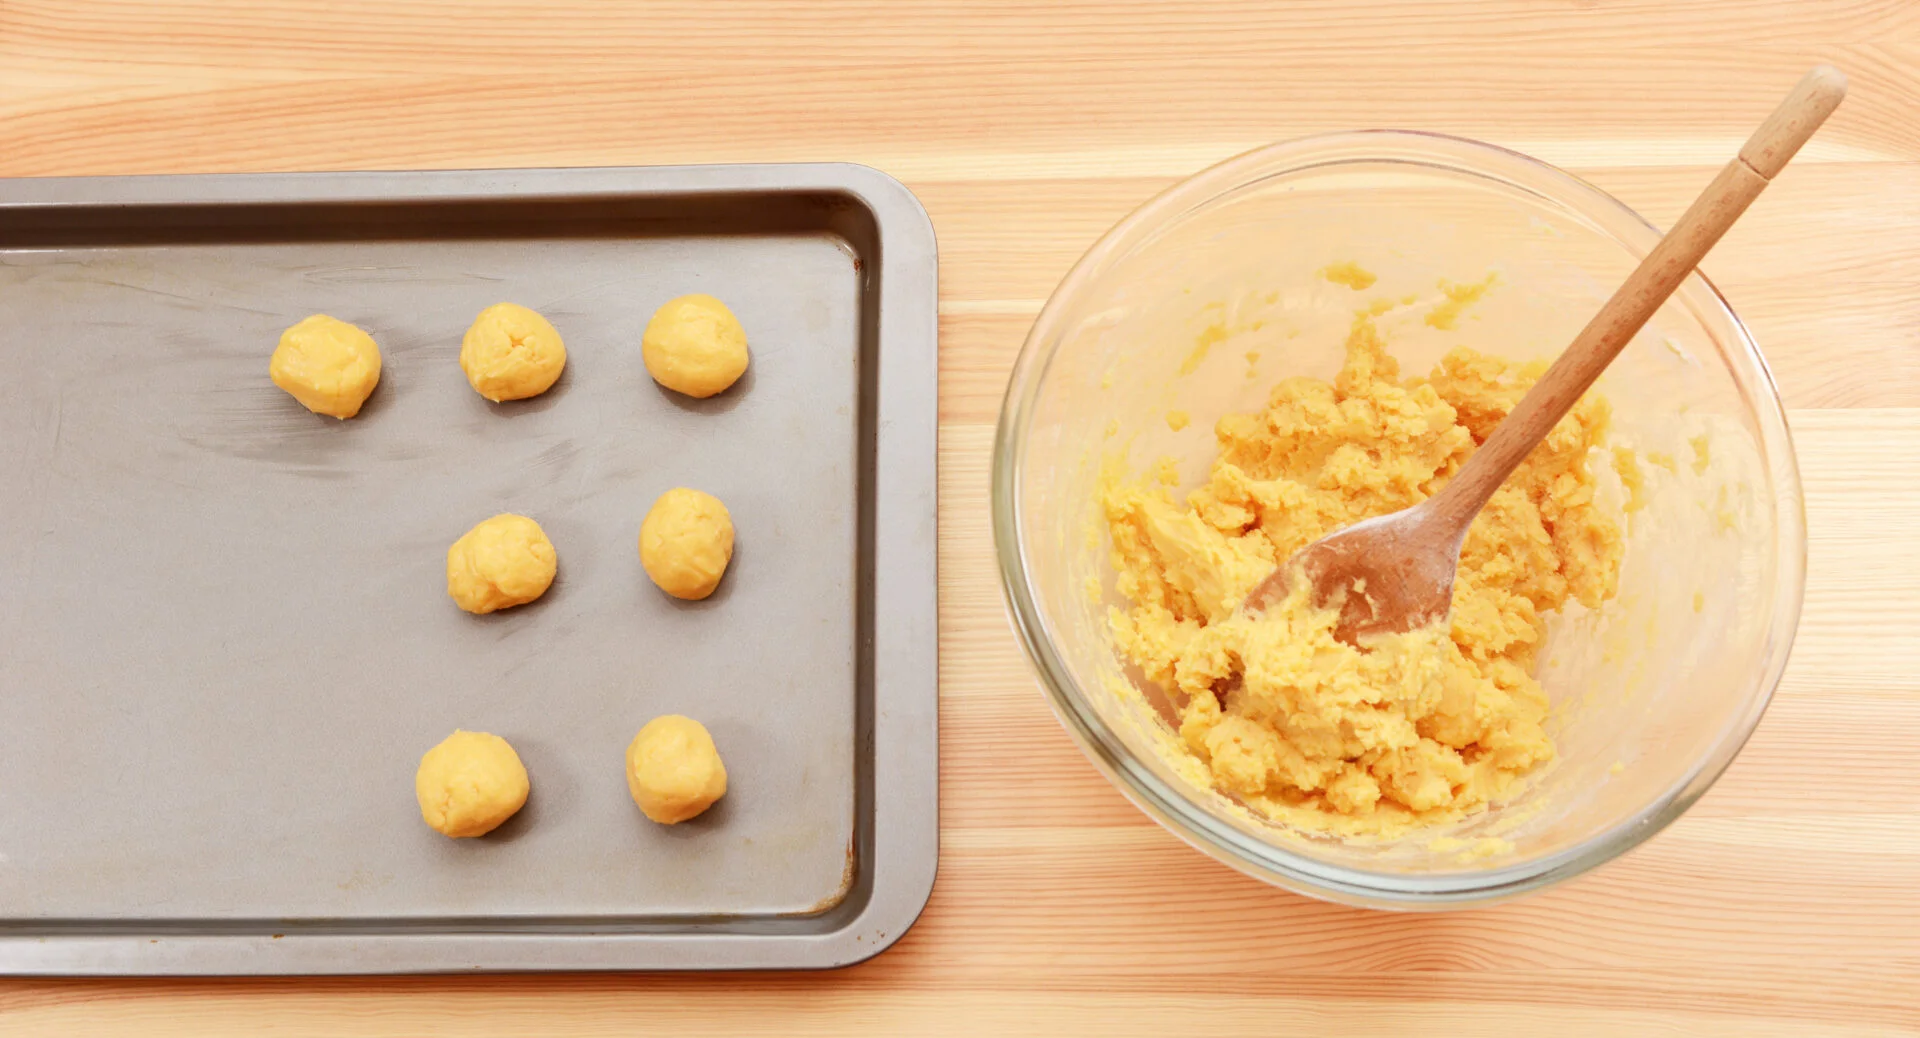 Adding balls of cookie dough to a baking sheet from a bowl of raw mixture